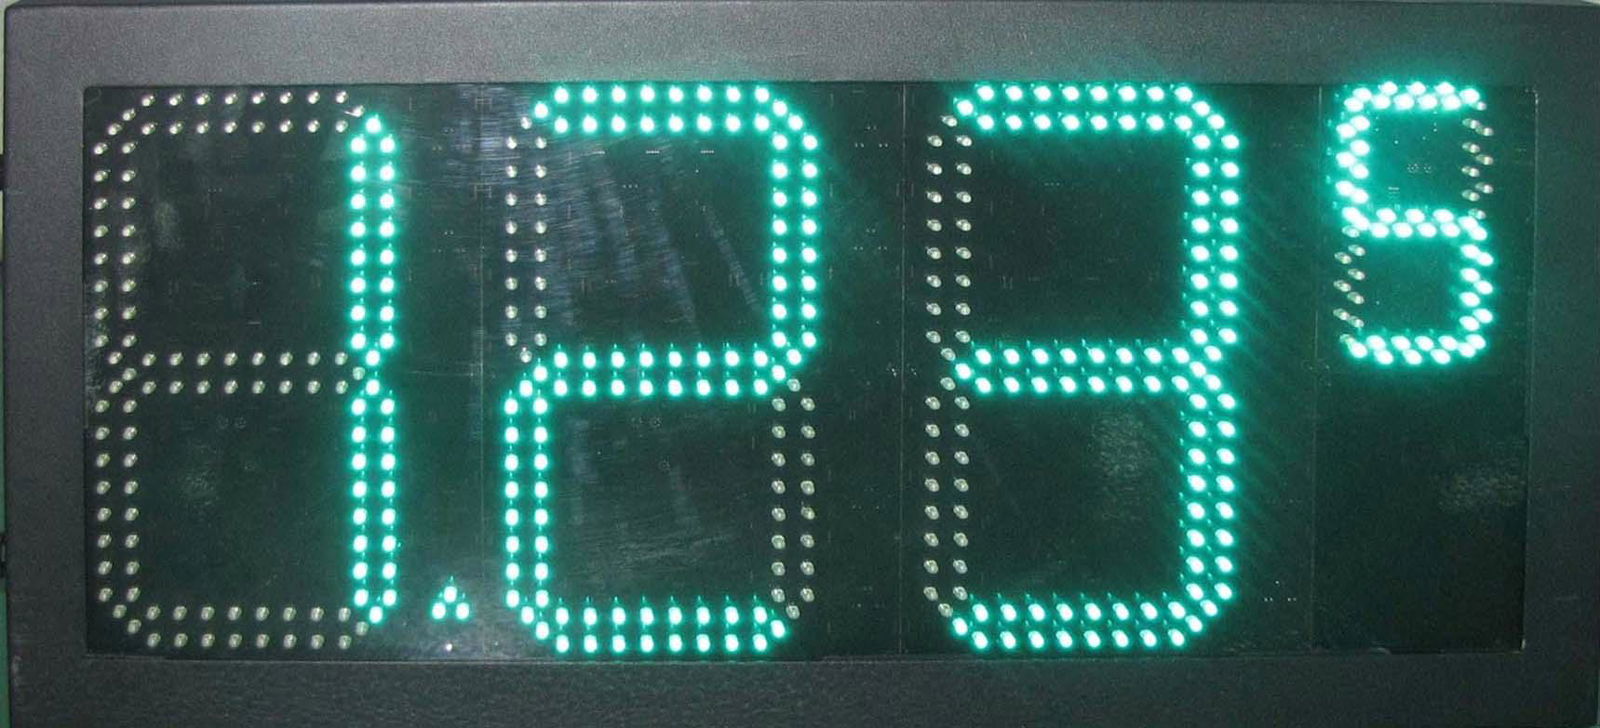 outdoor romote control 8.88 9 led numbers display board petrol station led fuel  2